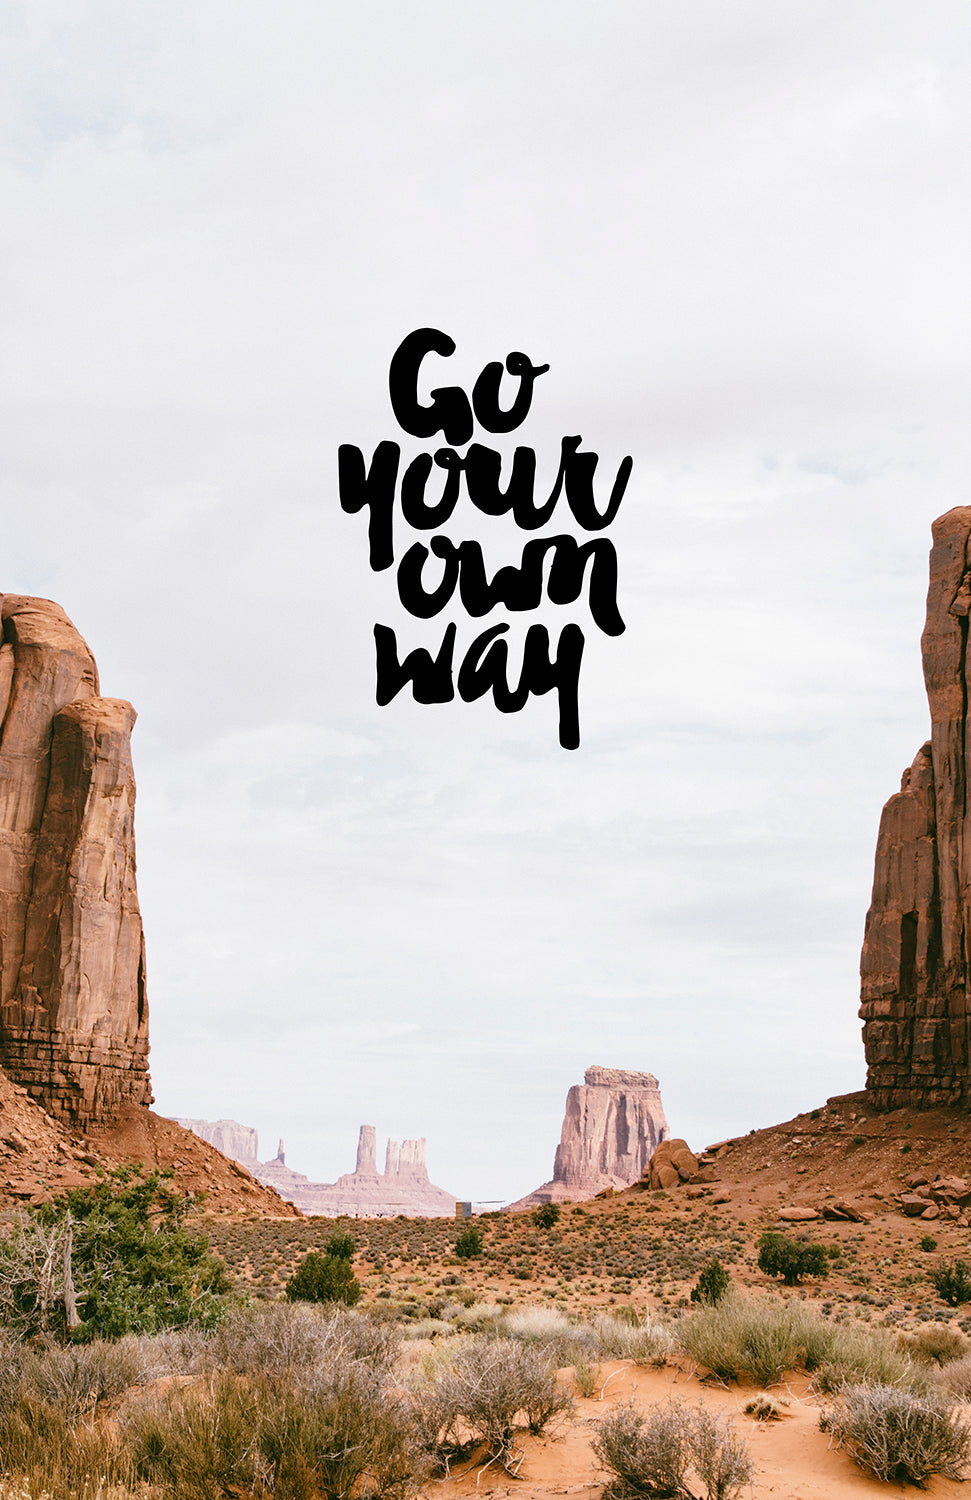 GO YOUR OWN WAY